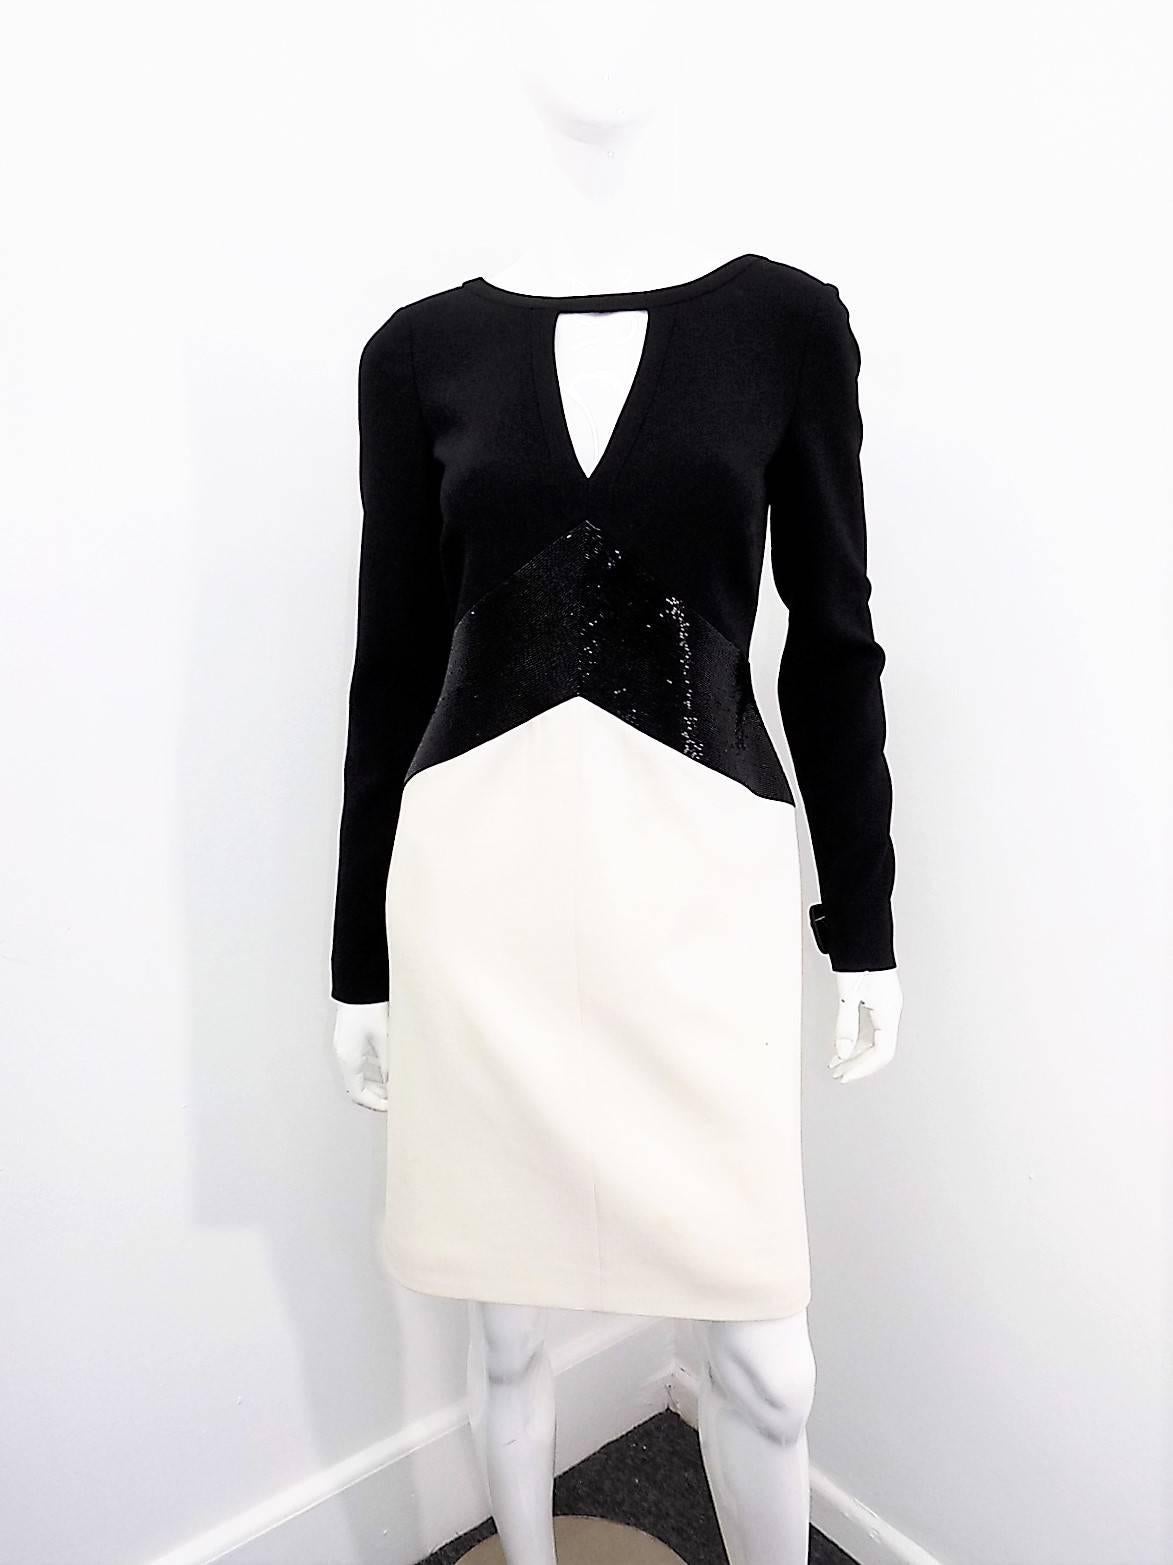 New and fabulous  Emilio Pucci White Bicolor Stretch Wool Dress . Black bugle beads waist line wide detail. Just stunning. Fully lined in silk. 98% wool and 2% elastine. 
Pristine condition. Like new.Size Italian 44 but very small . Will fit sz 6,